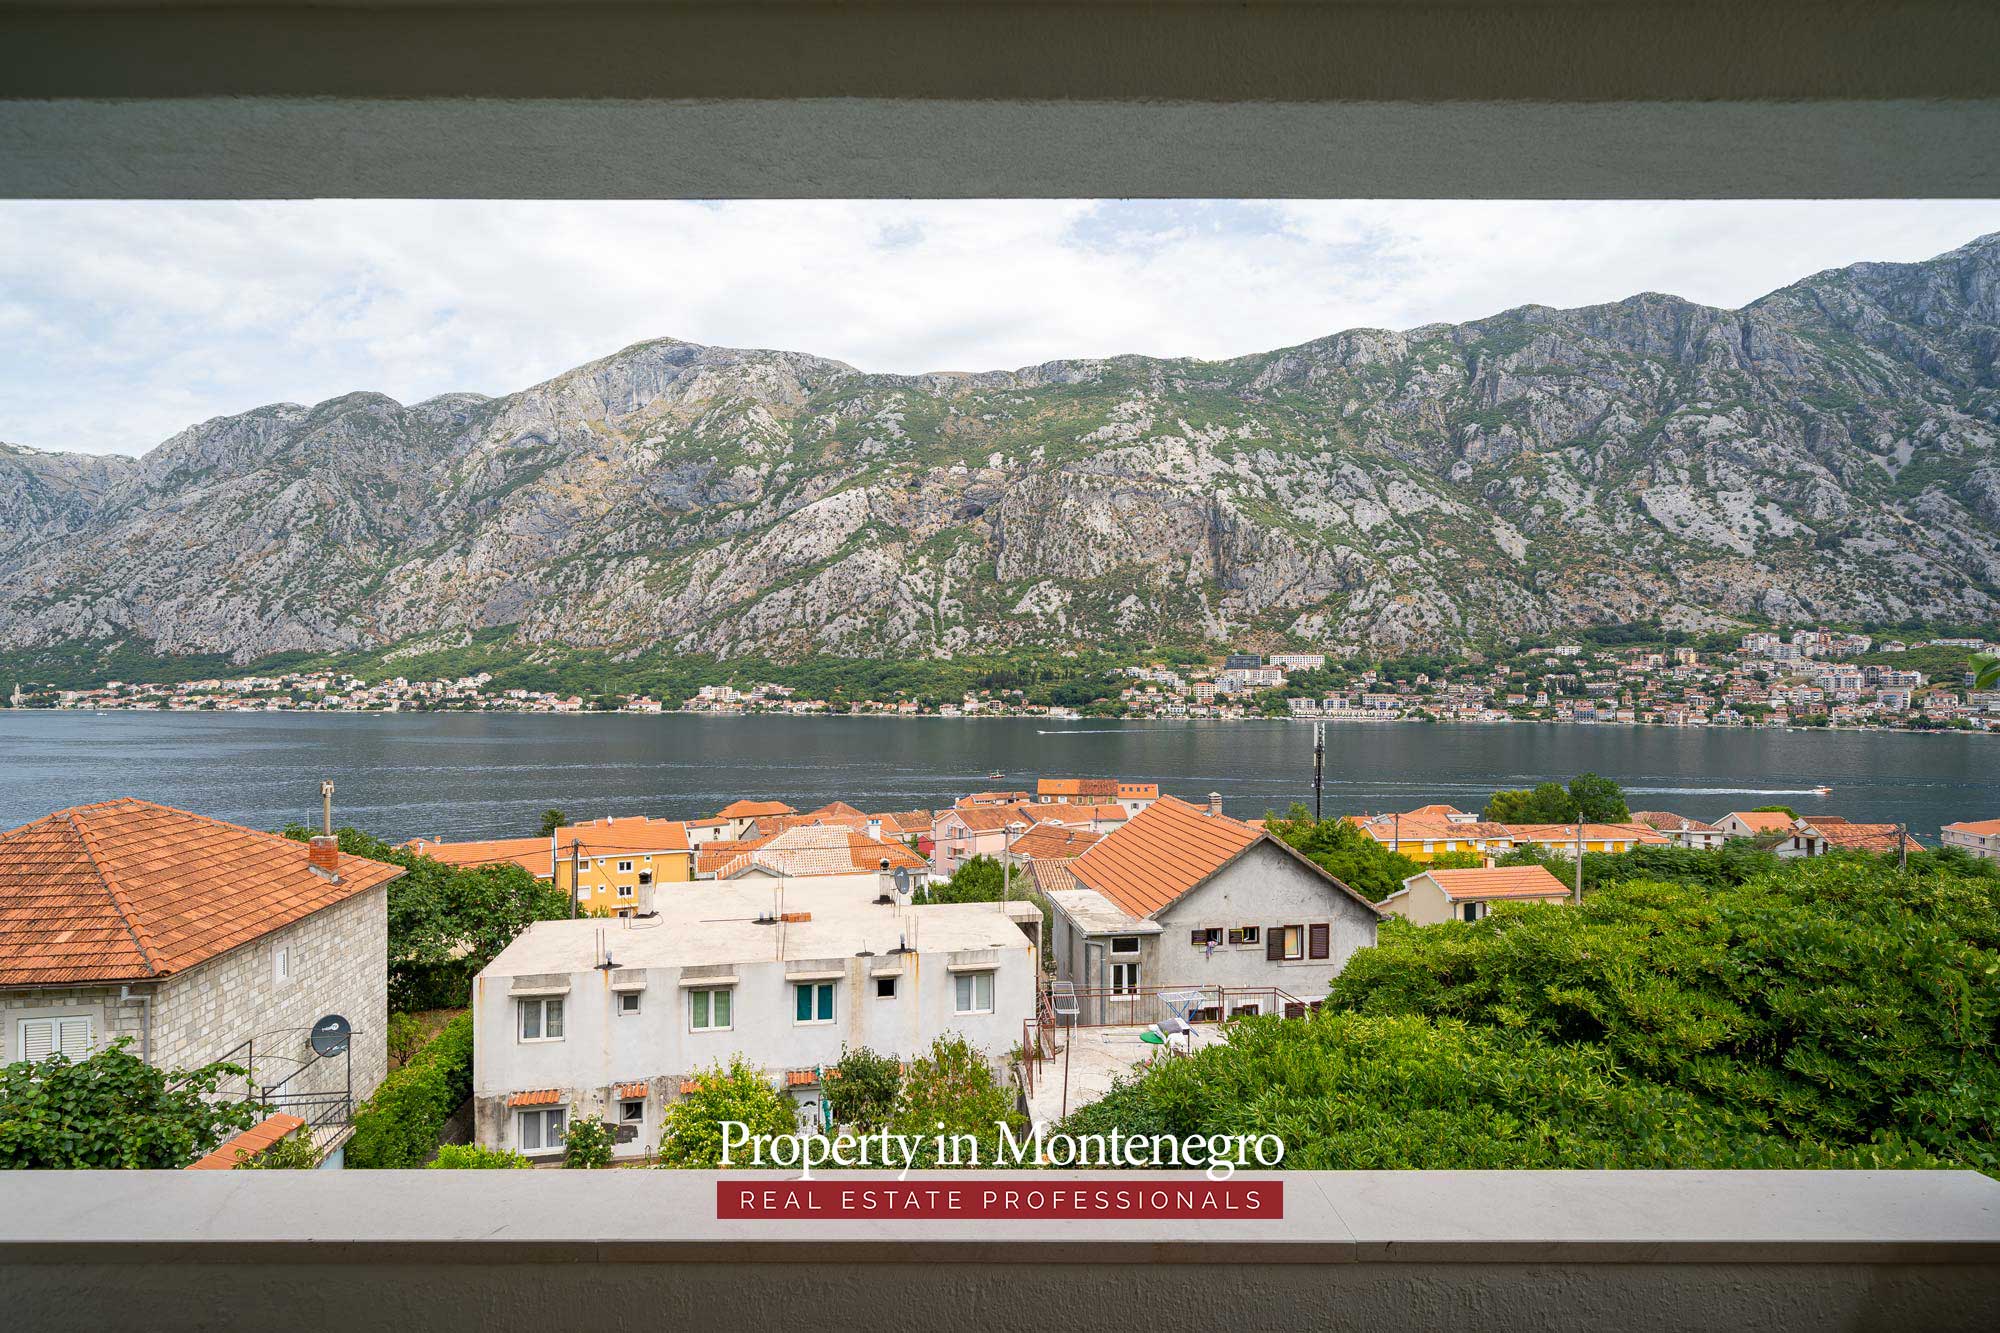 House with swimming pool for sale in Kotor Bay